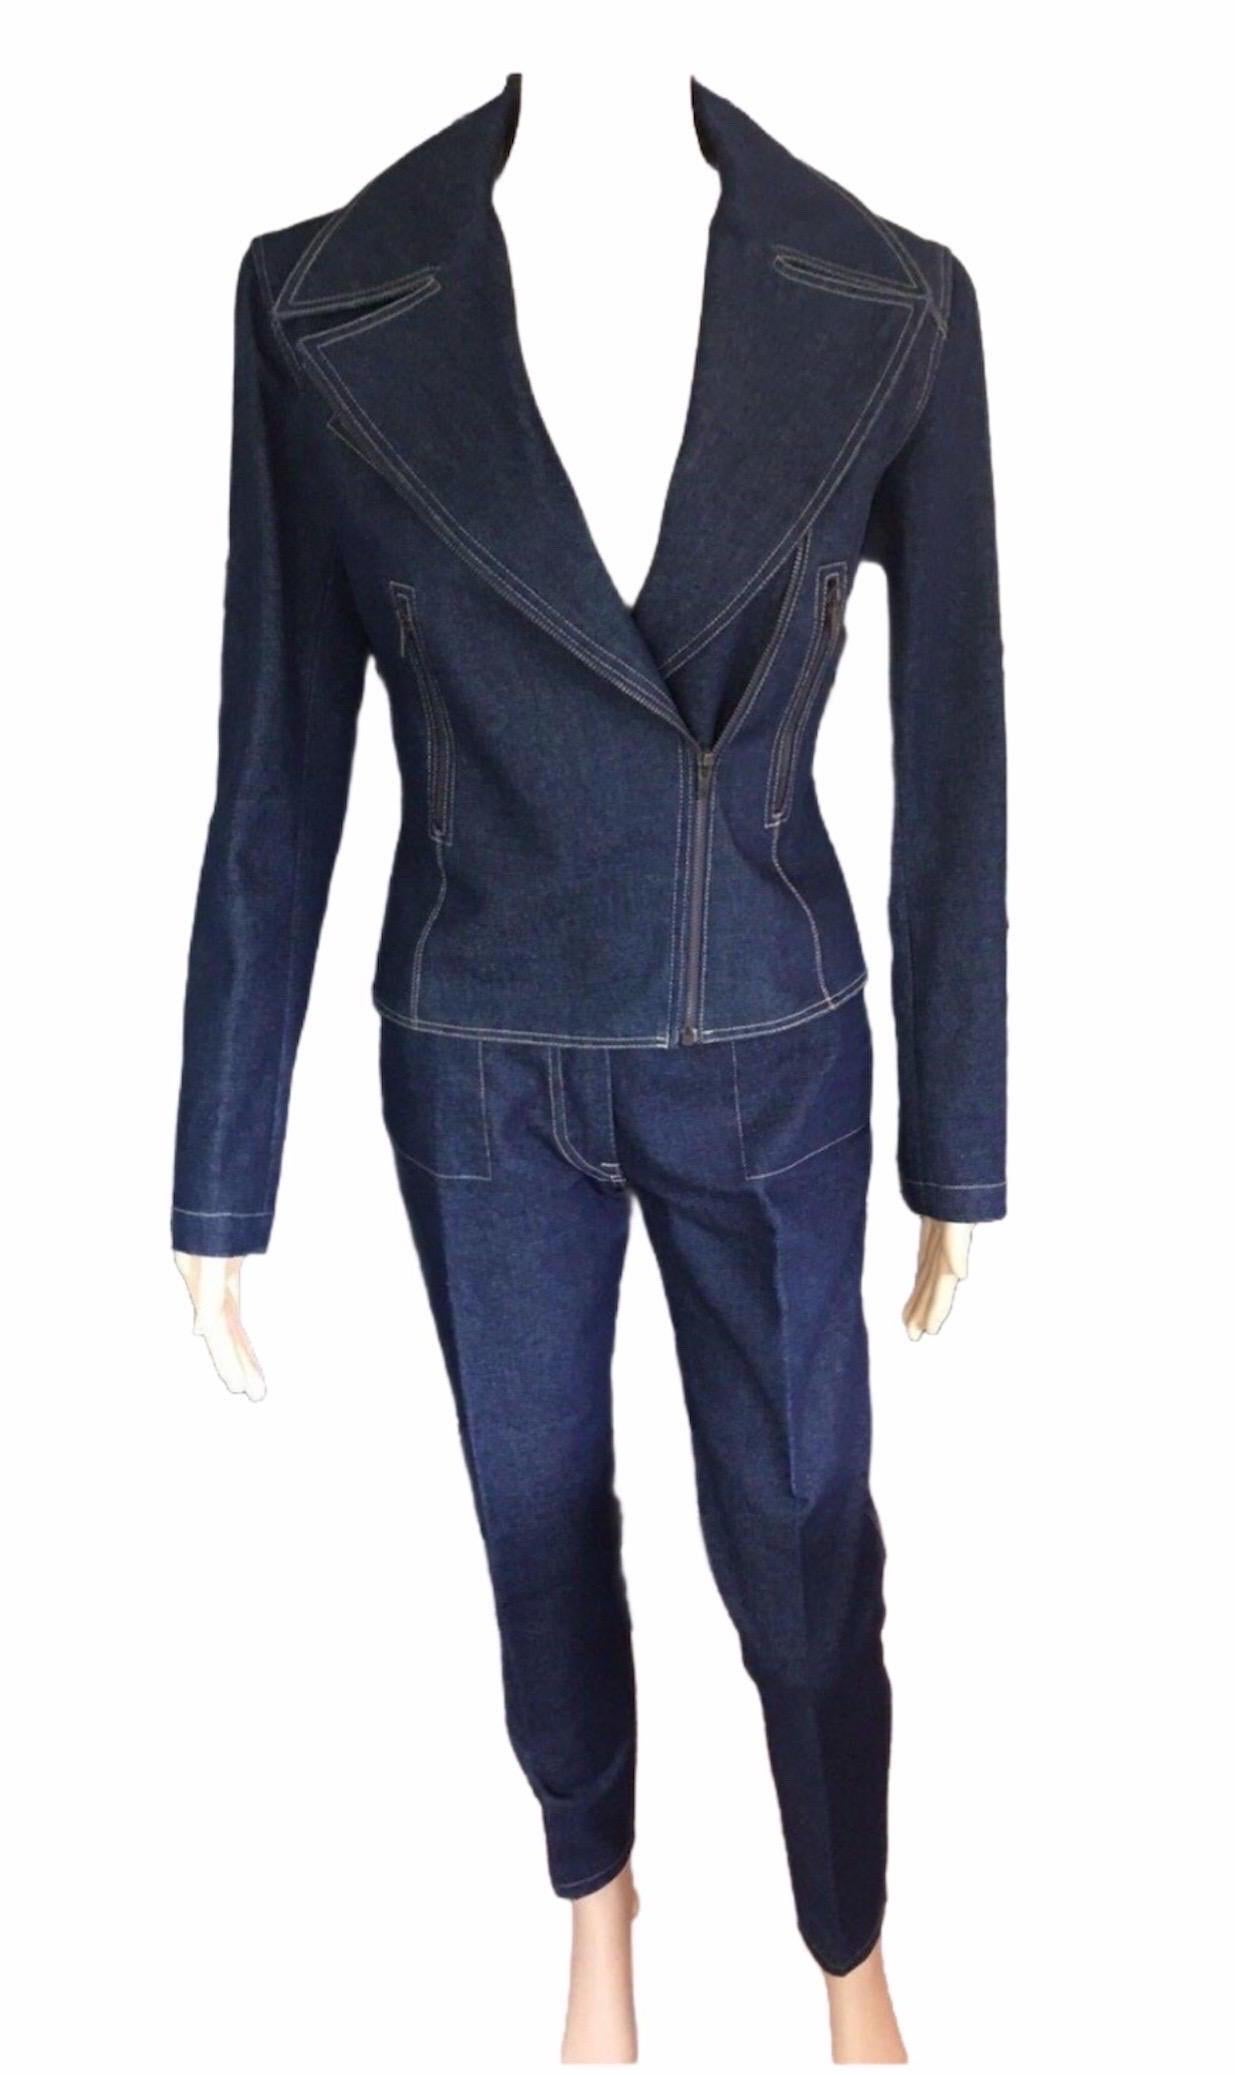 Alaïa denim 2 piece pantsuit. Jacket features notched lapels, three zip-accented pockets at front, lace-up accents at back and zip closure at front. Pants feature four pockets, contrast stitching throughout and zip closure at front. Excellent